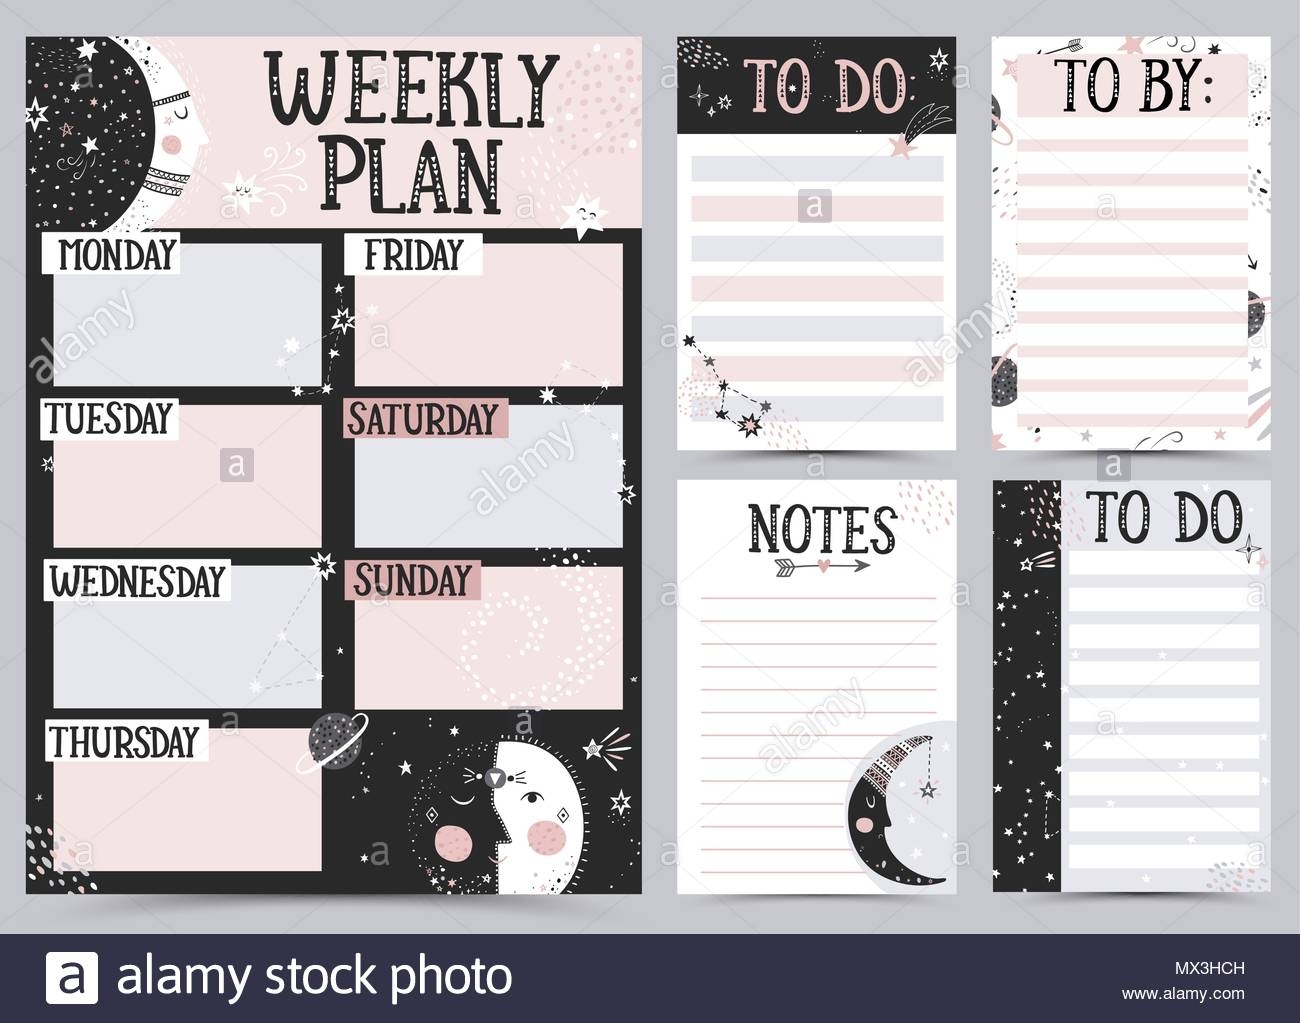 Weekly And Daily Planner Template. Organizer And Schedule With Notes intended for Monday Through Friday Daily Planner